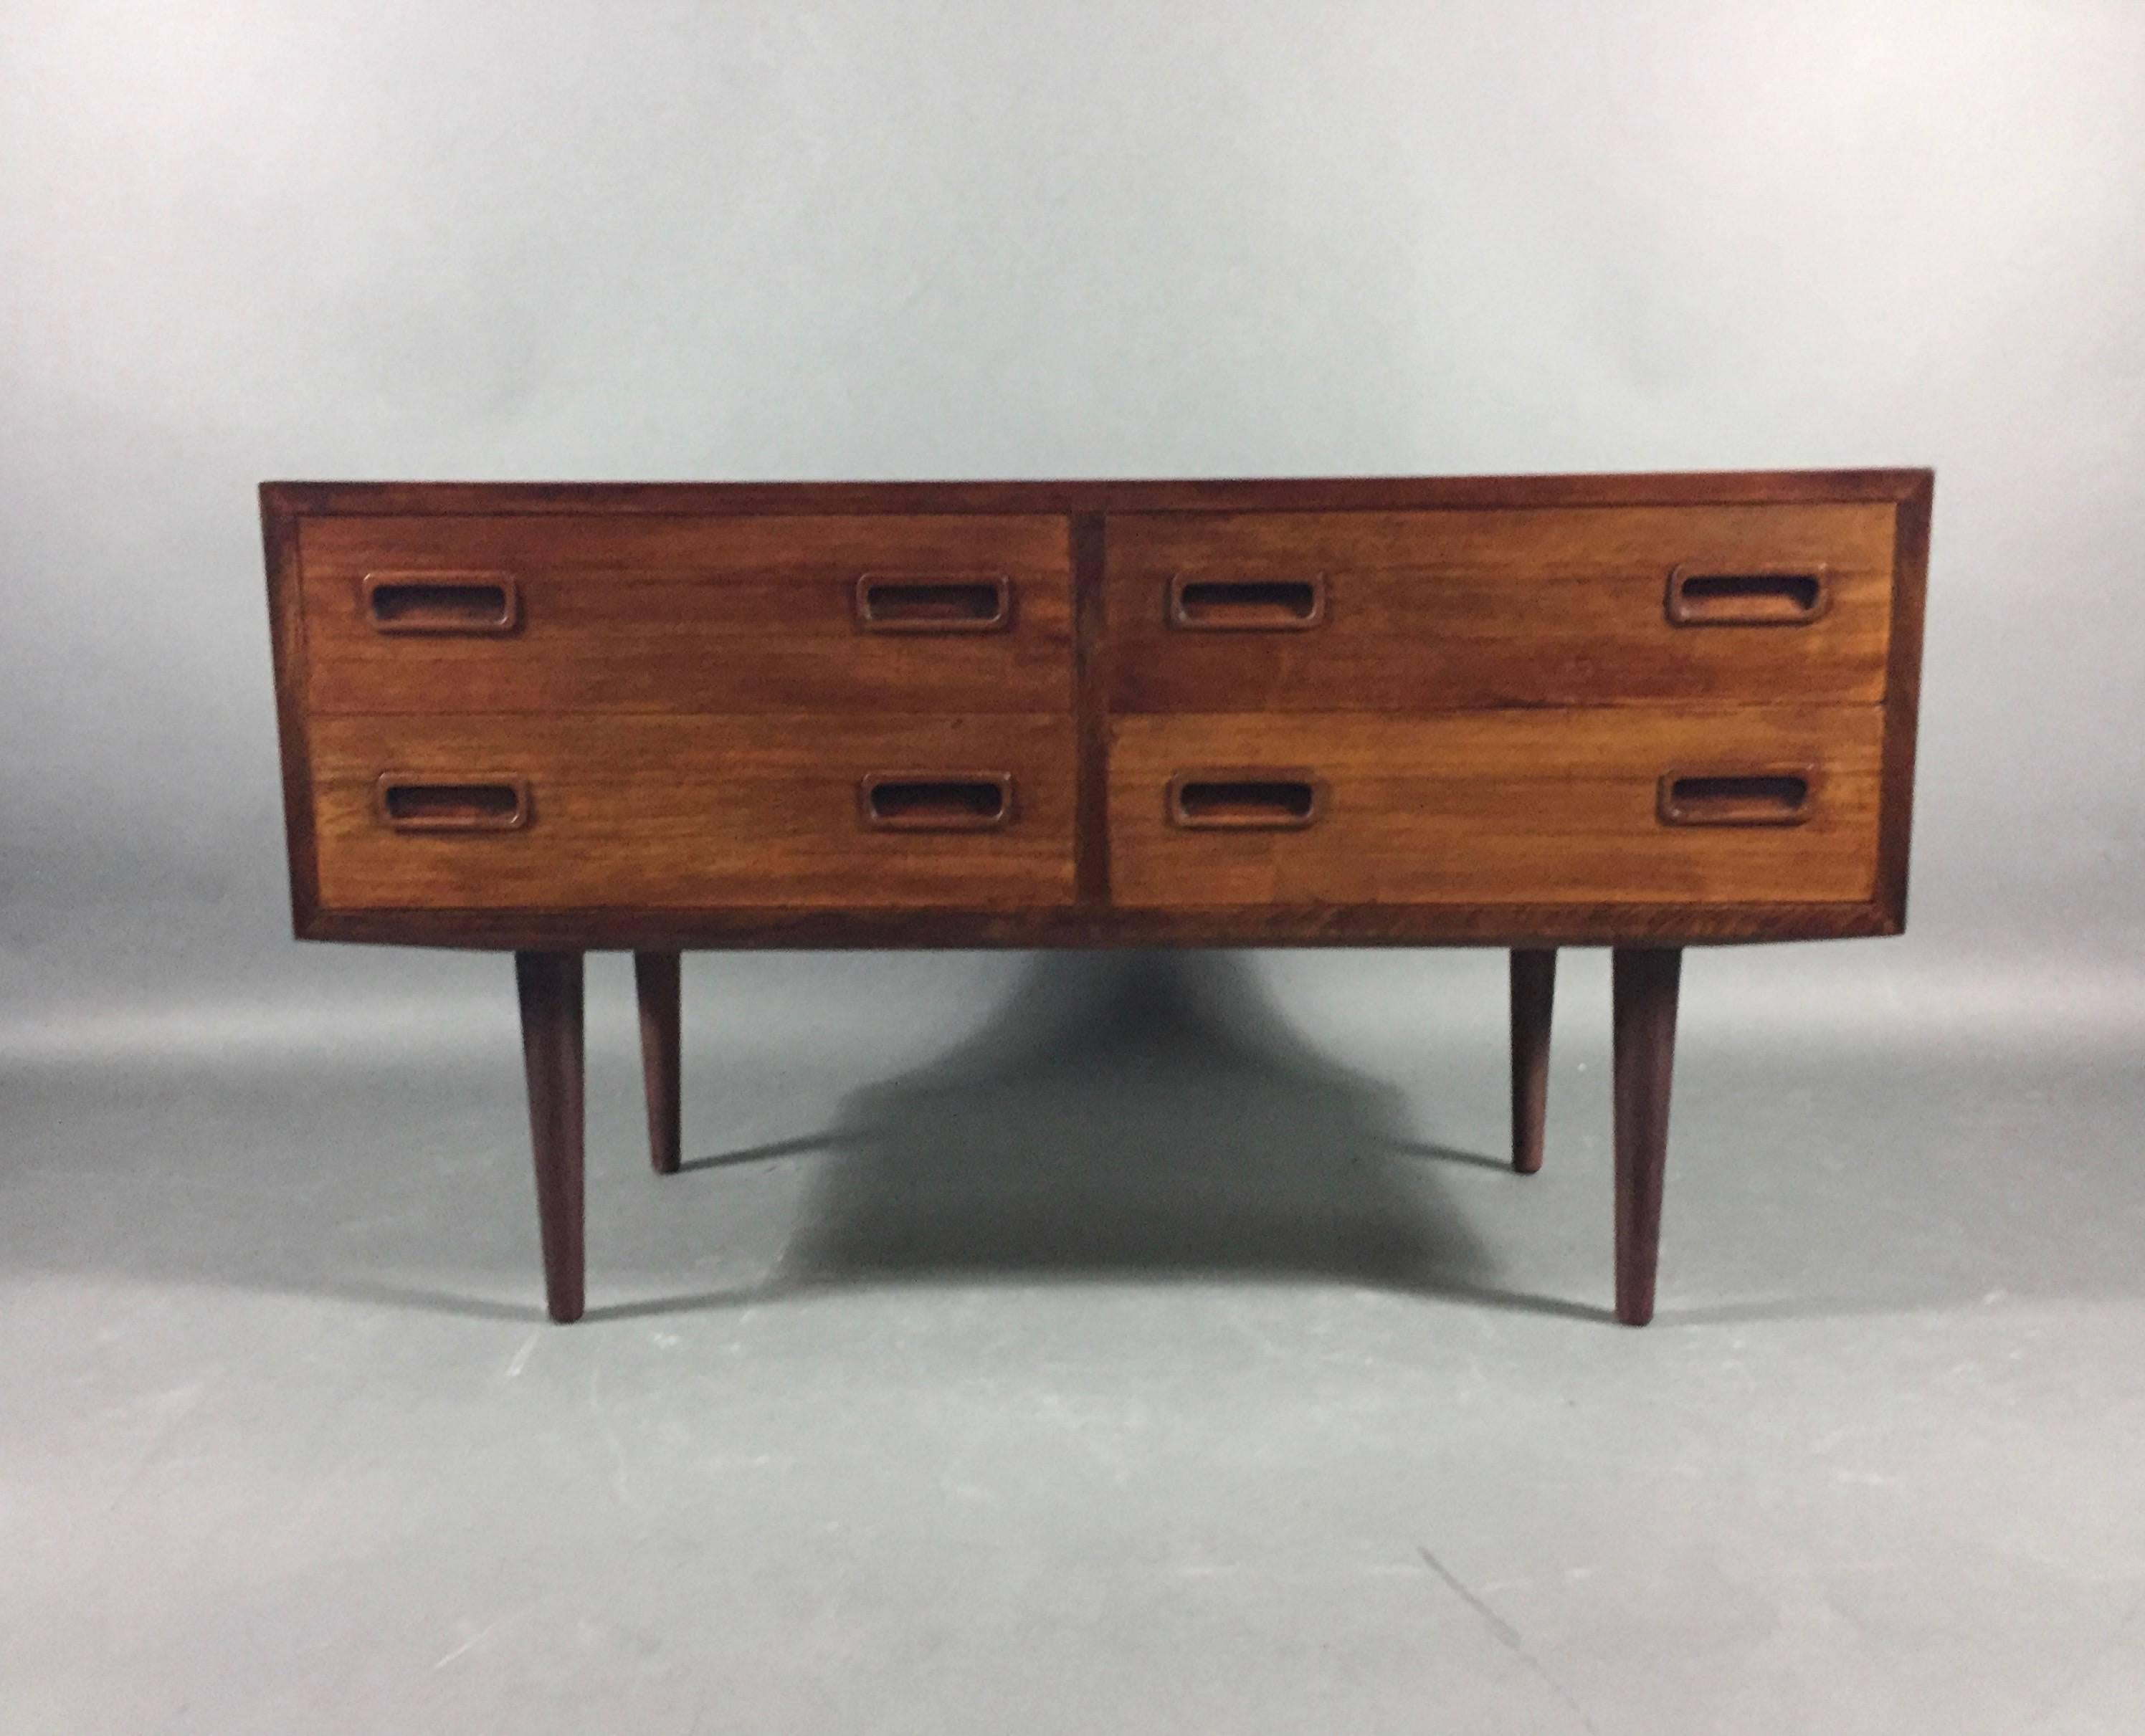 A beautiful low chest with four-drawer and carefully crafted rosewood handles over tapered legs. Striking rosewood grain pattern to top and sides. Denmark, circa 1960s. Danish control stamp to back. Excellent refinished condition. Minor veneer break